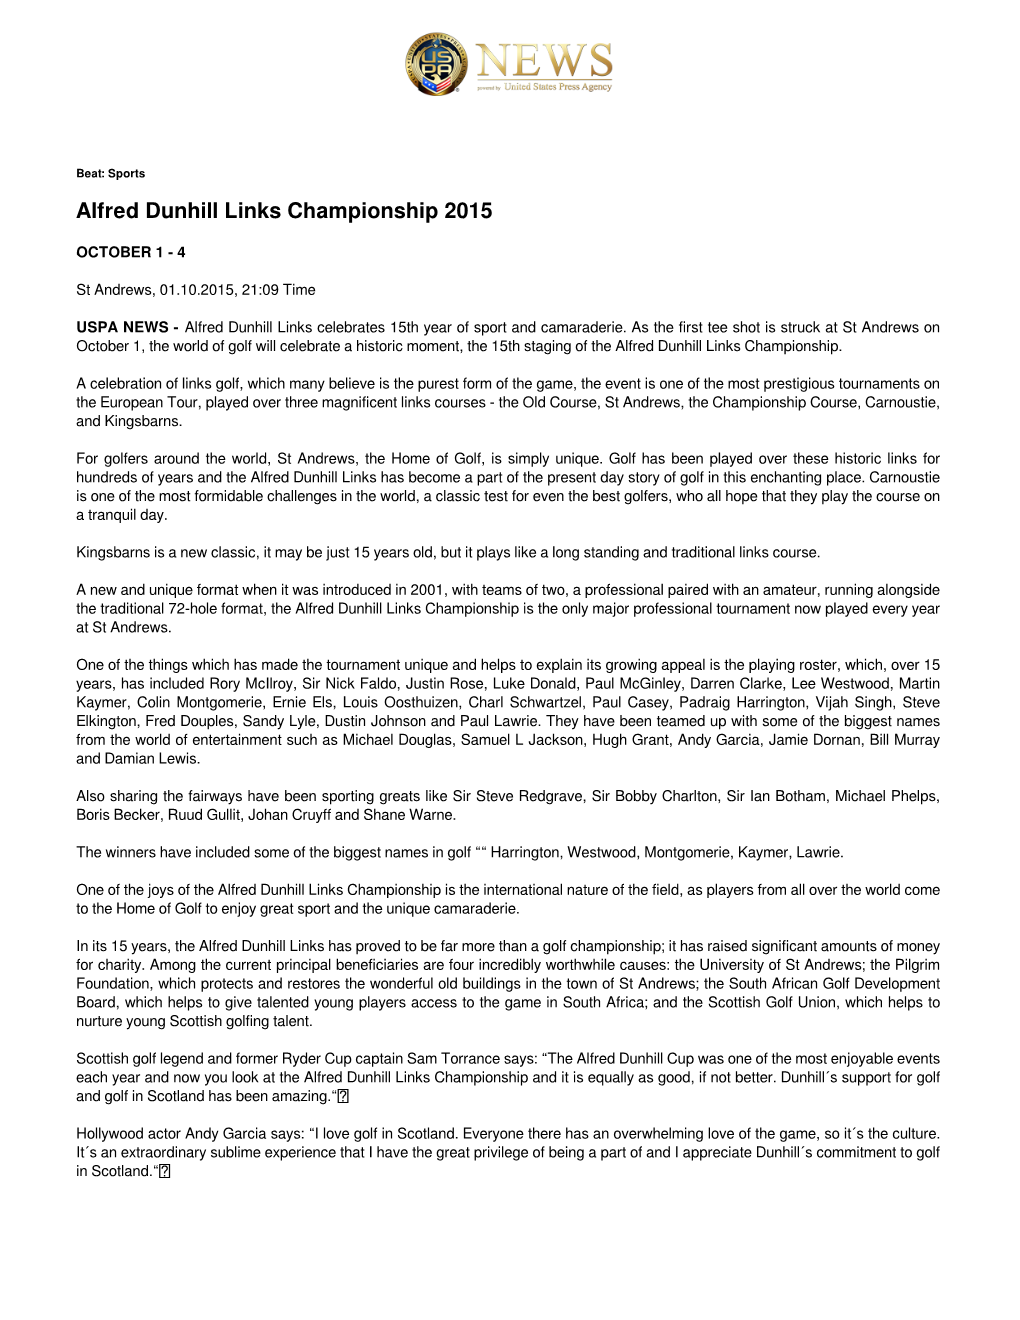 Alfred Dunhill Links Championship 2015